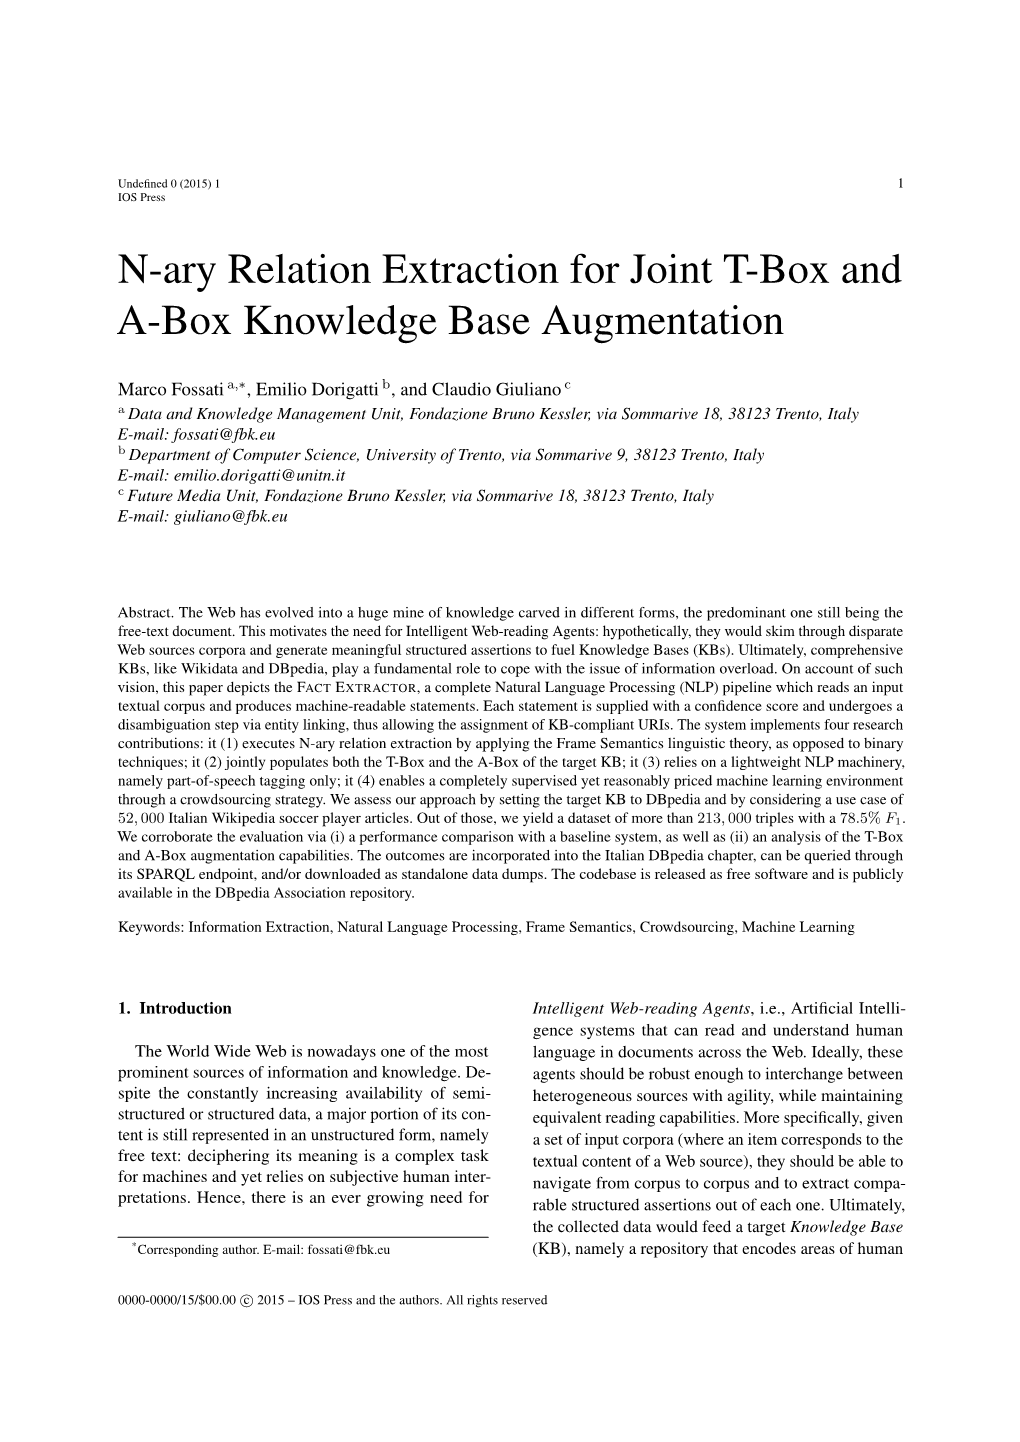 N-Ary Relation Extraction for Joint T-Box and A-Box Knowledge Base Augmentation